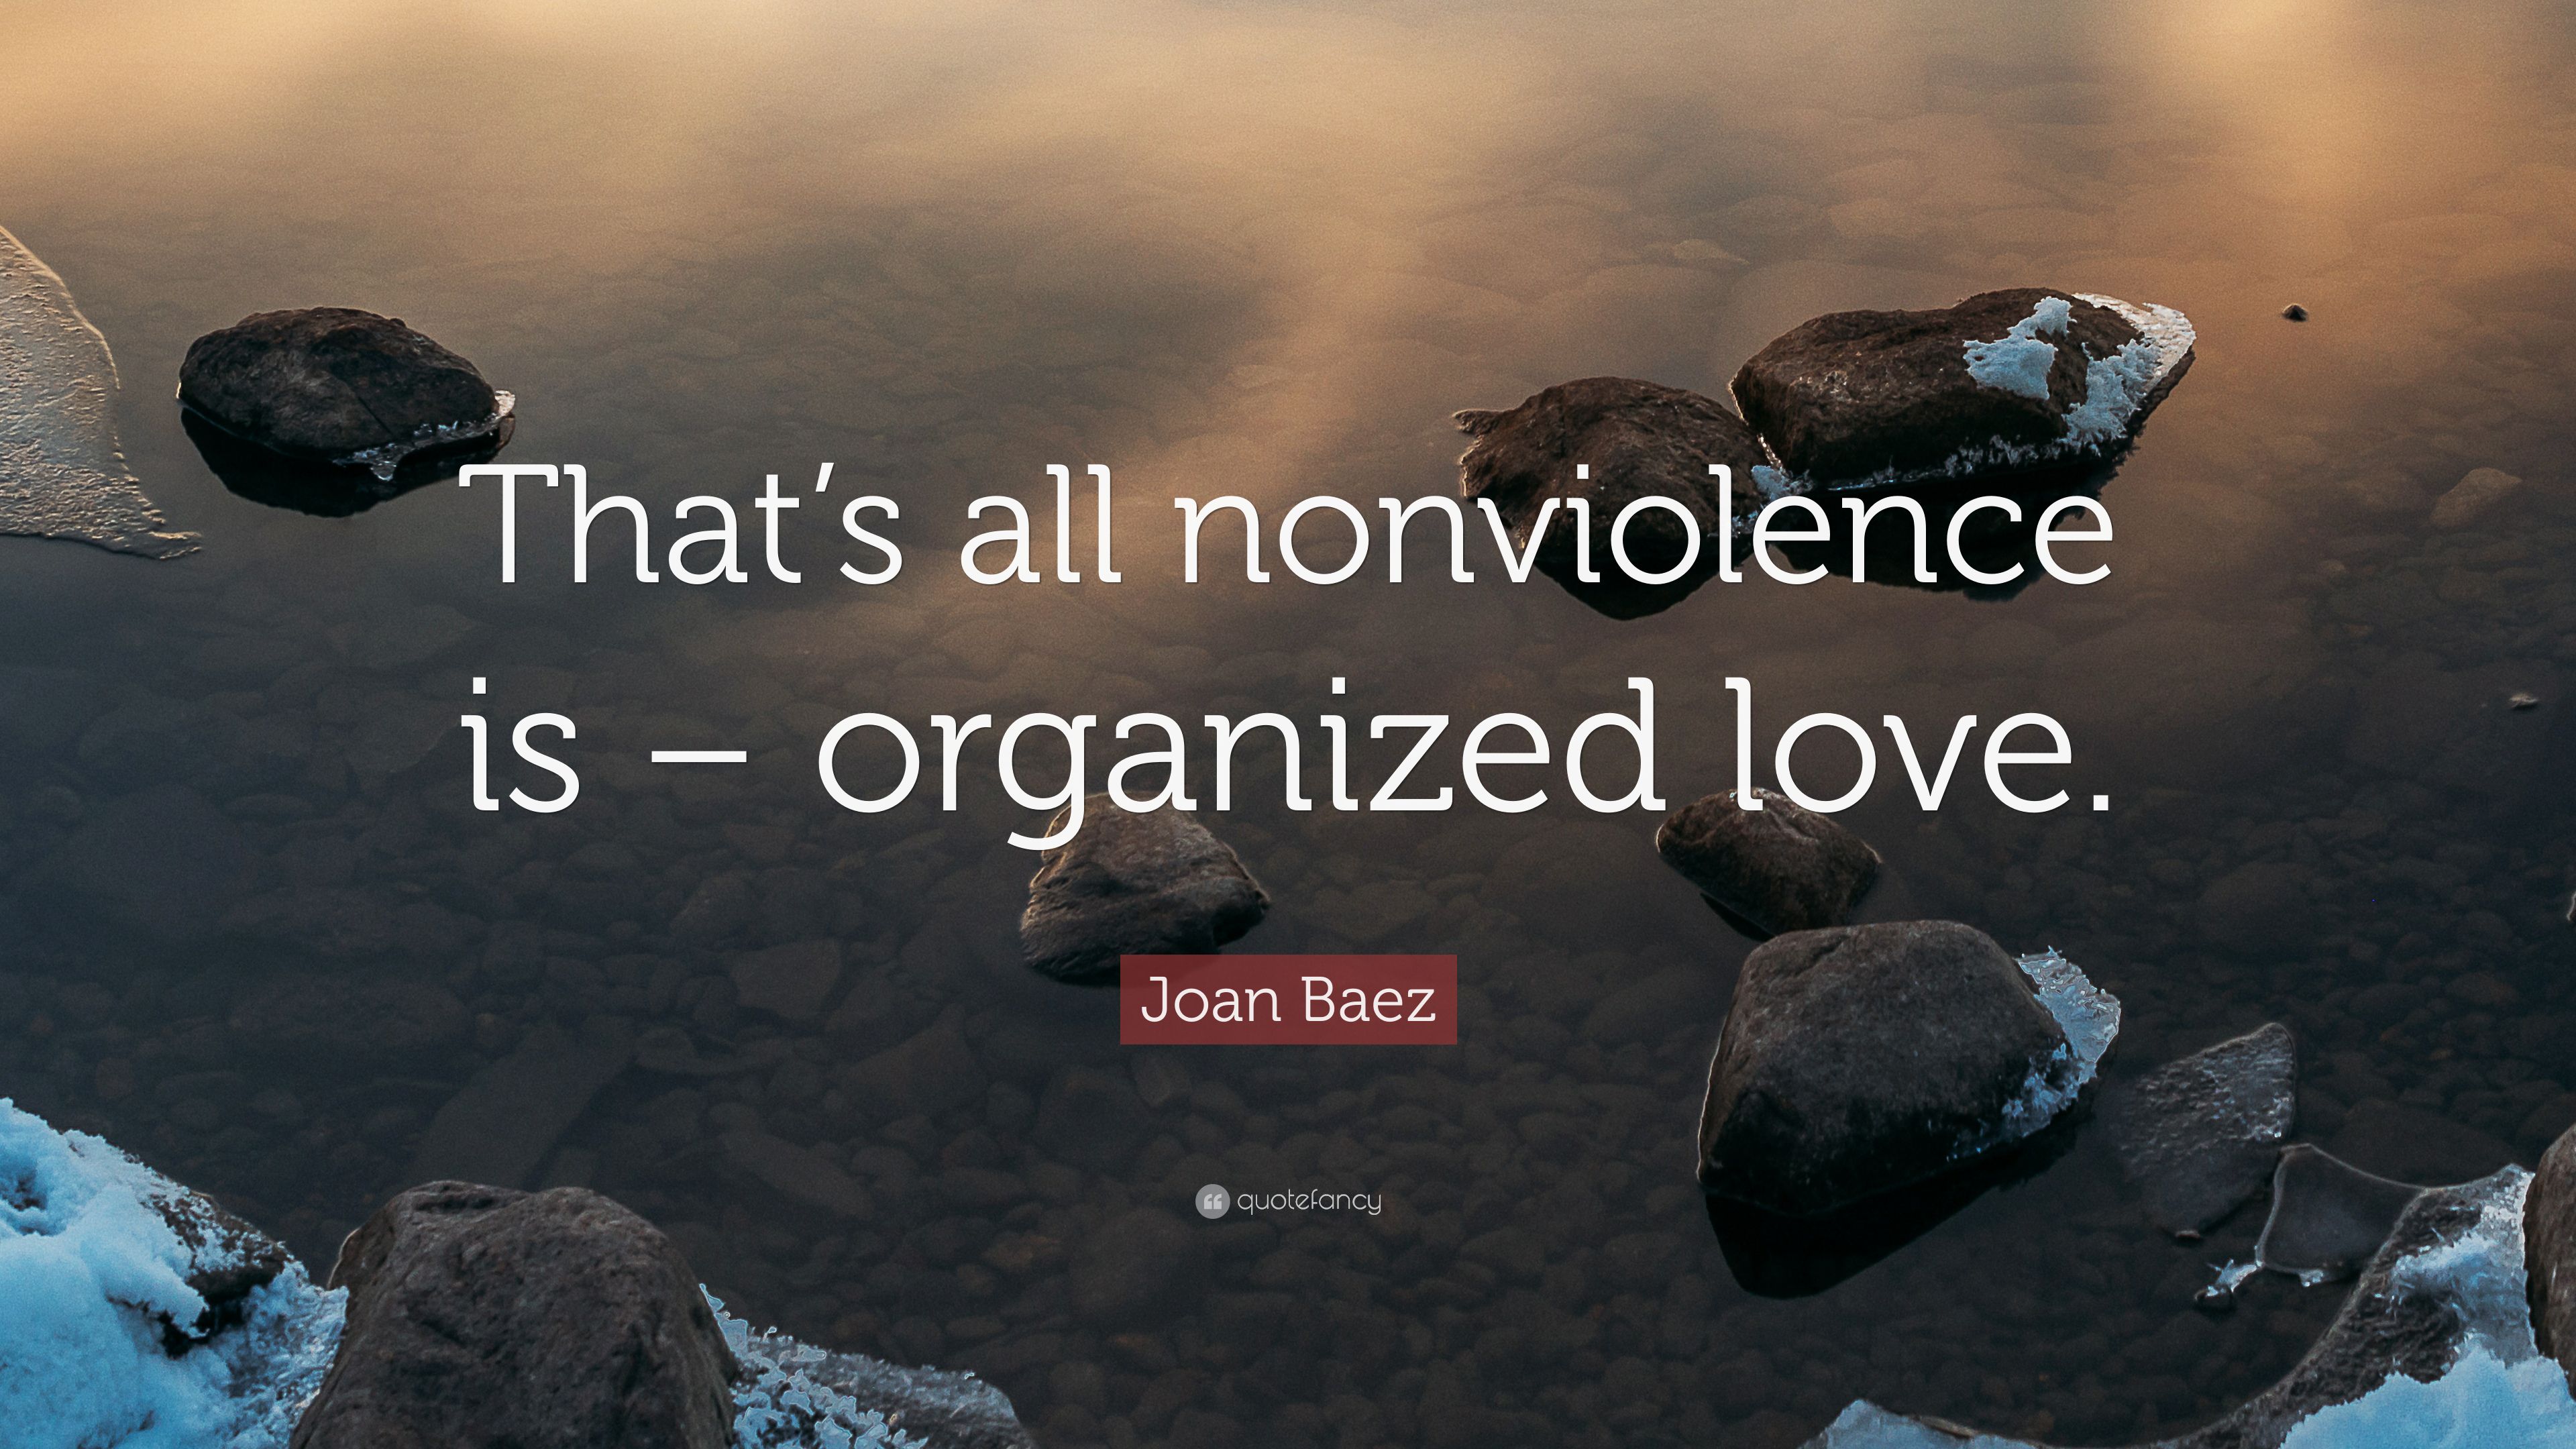 Joan Baez Quote: “That's all nonviolence is